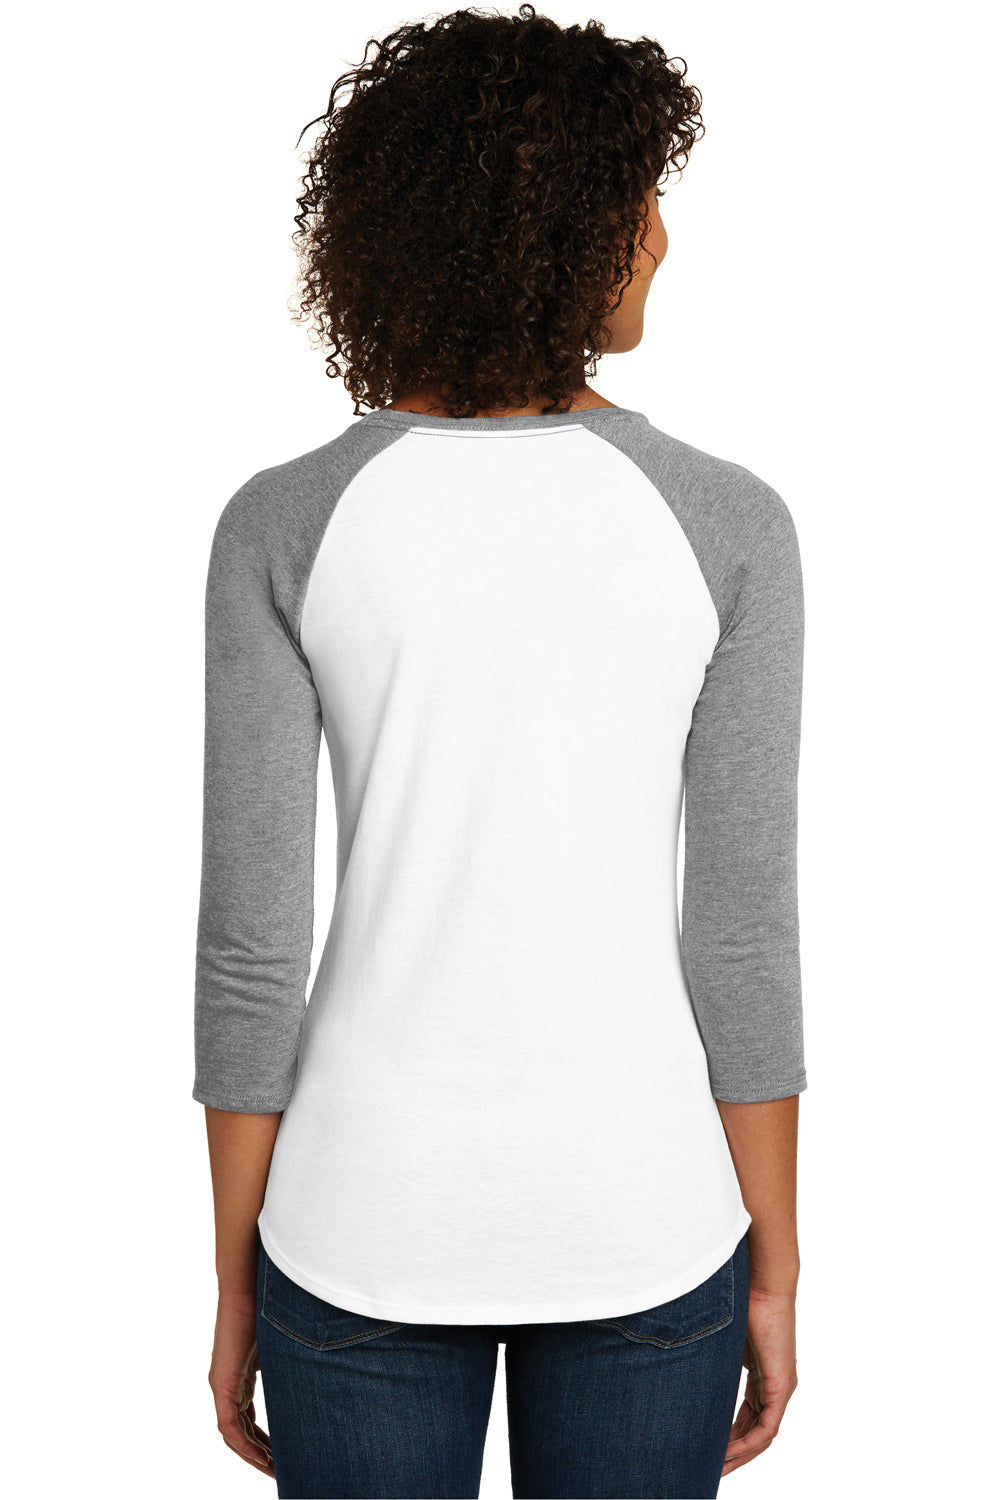 District DT6211 Womens Very Important 3/4 Sleeve Crewneck T-Shirt White/Heather Light Grey Back